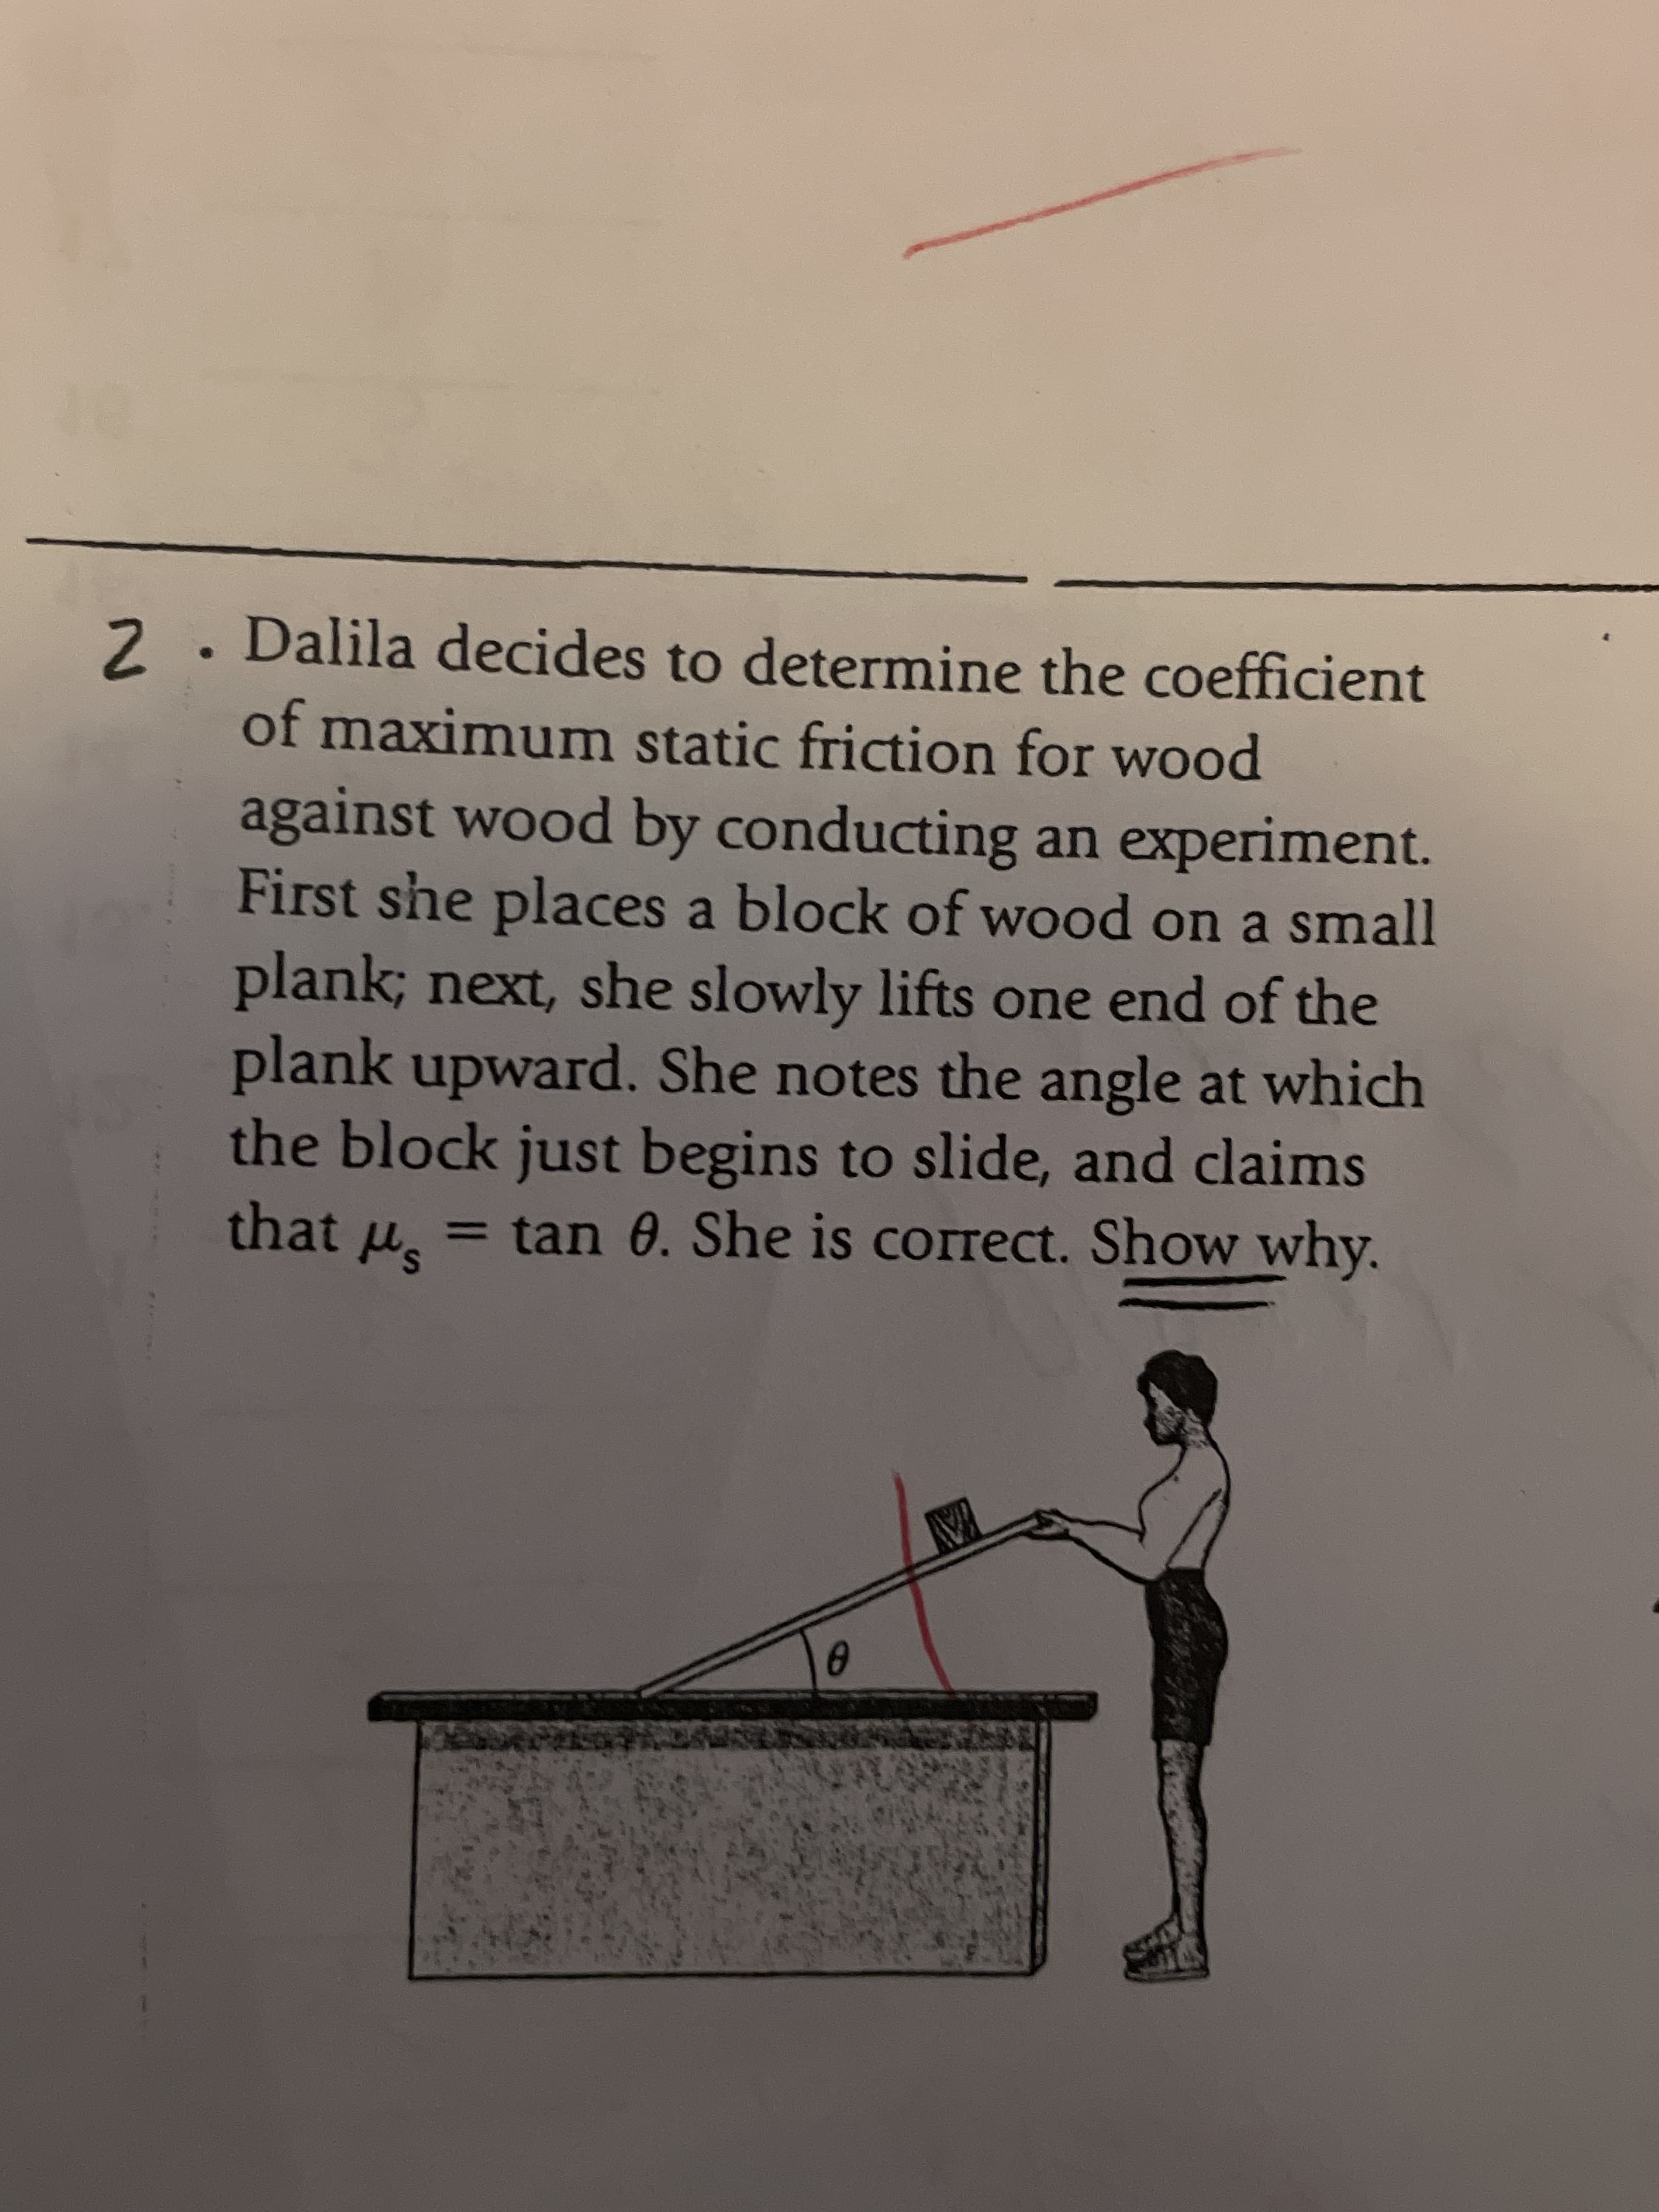 2. Dalila decides to determine the coefficient
of maximum static friction for wood
against wood by conducting an experiment.
First she places a block of wood on a small
plank; next, she slowly lifts one end of the
plank upward. She notes the angle at which
the block just begins to slide, and claims
that u, = tan 0. She is correct. Show why.
%3D
YAY
